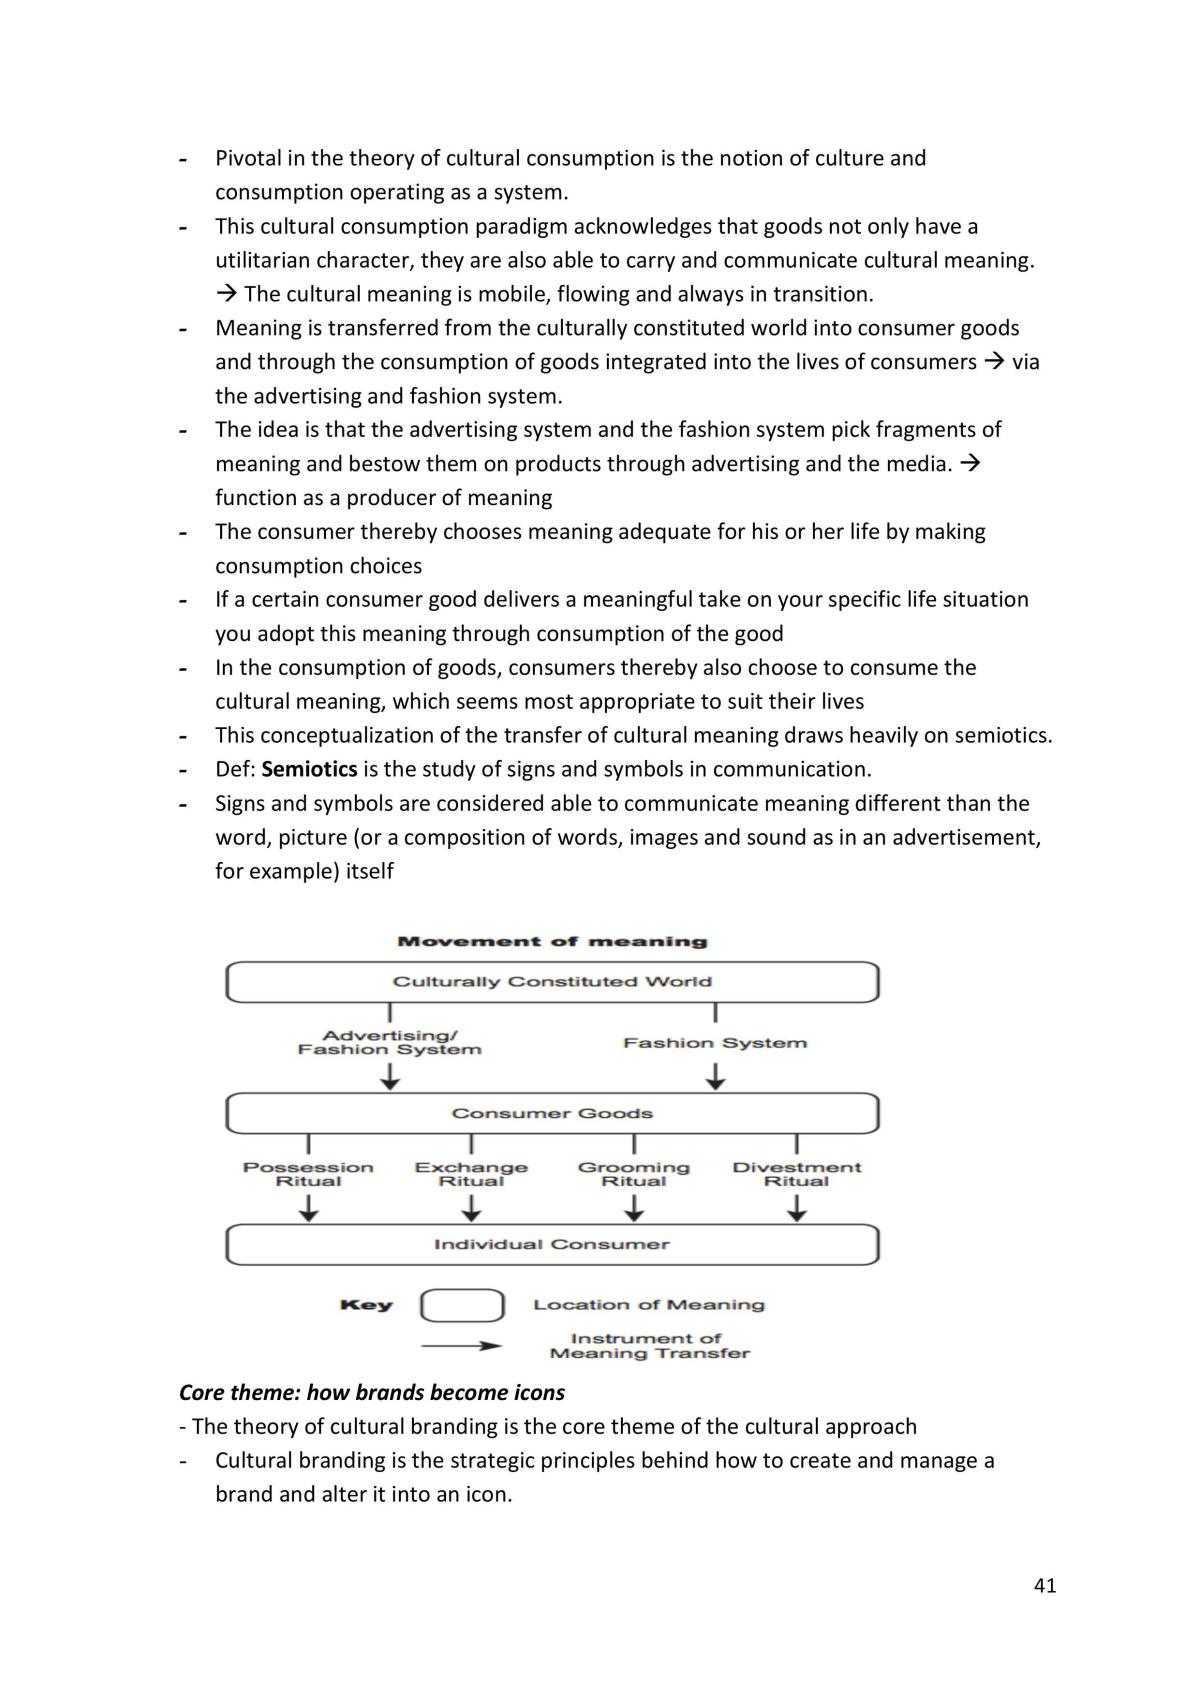 Brand Management Overview - Page 41